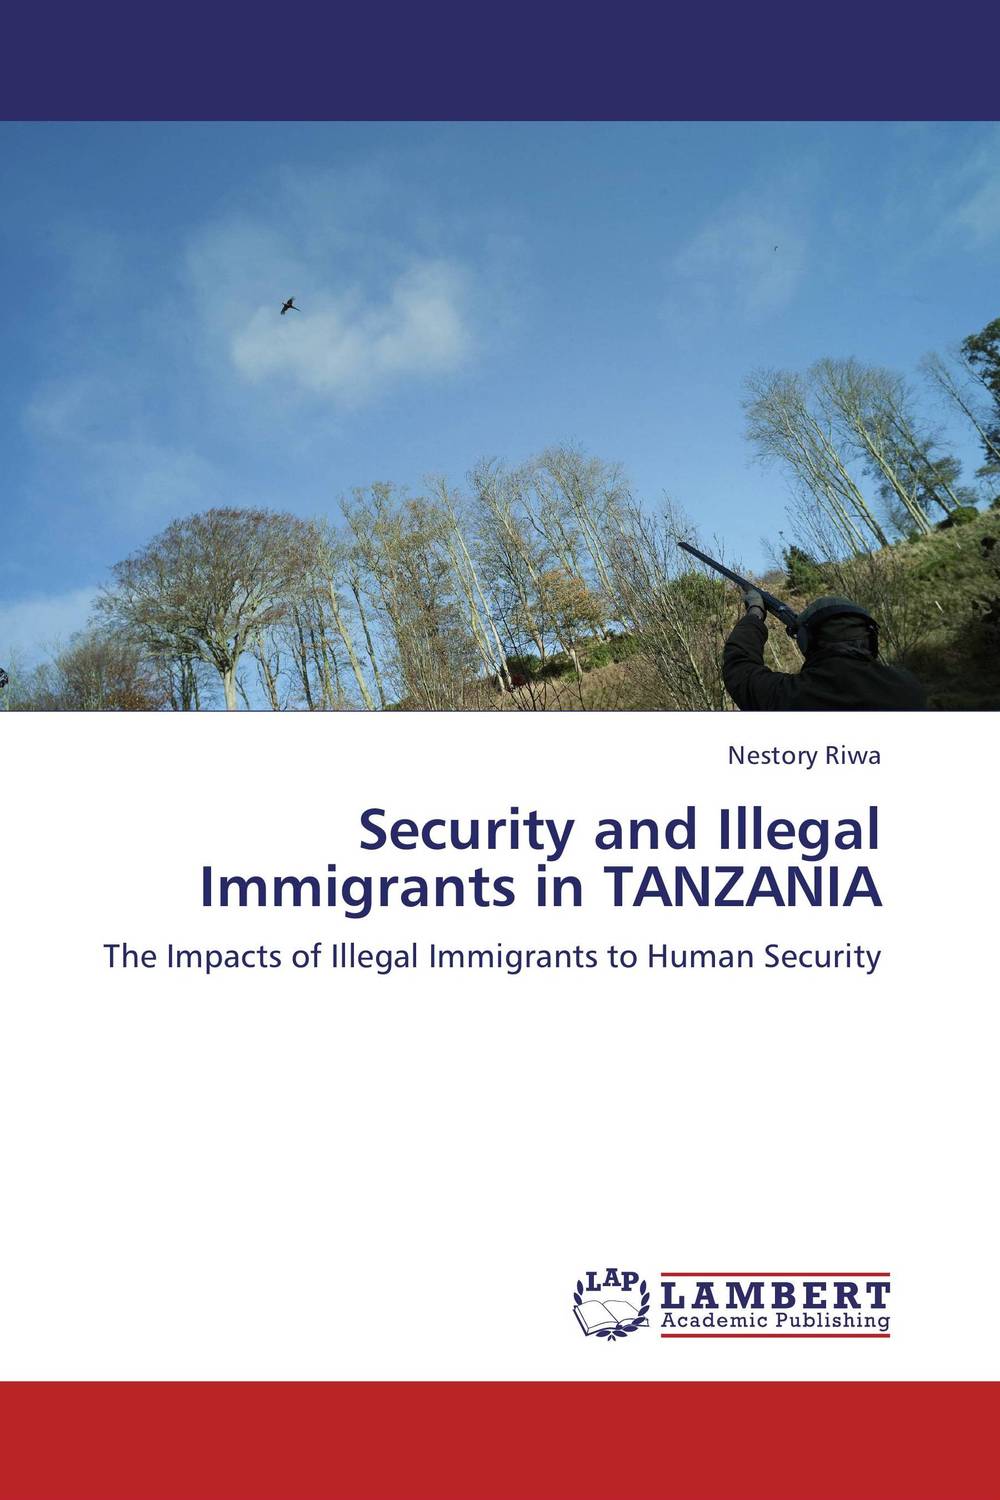 Security and Illegal Immigrants in TANZANIA